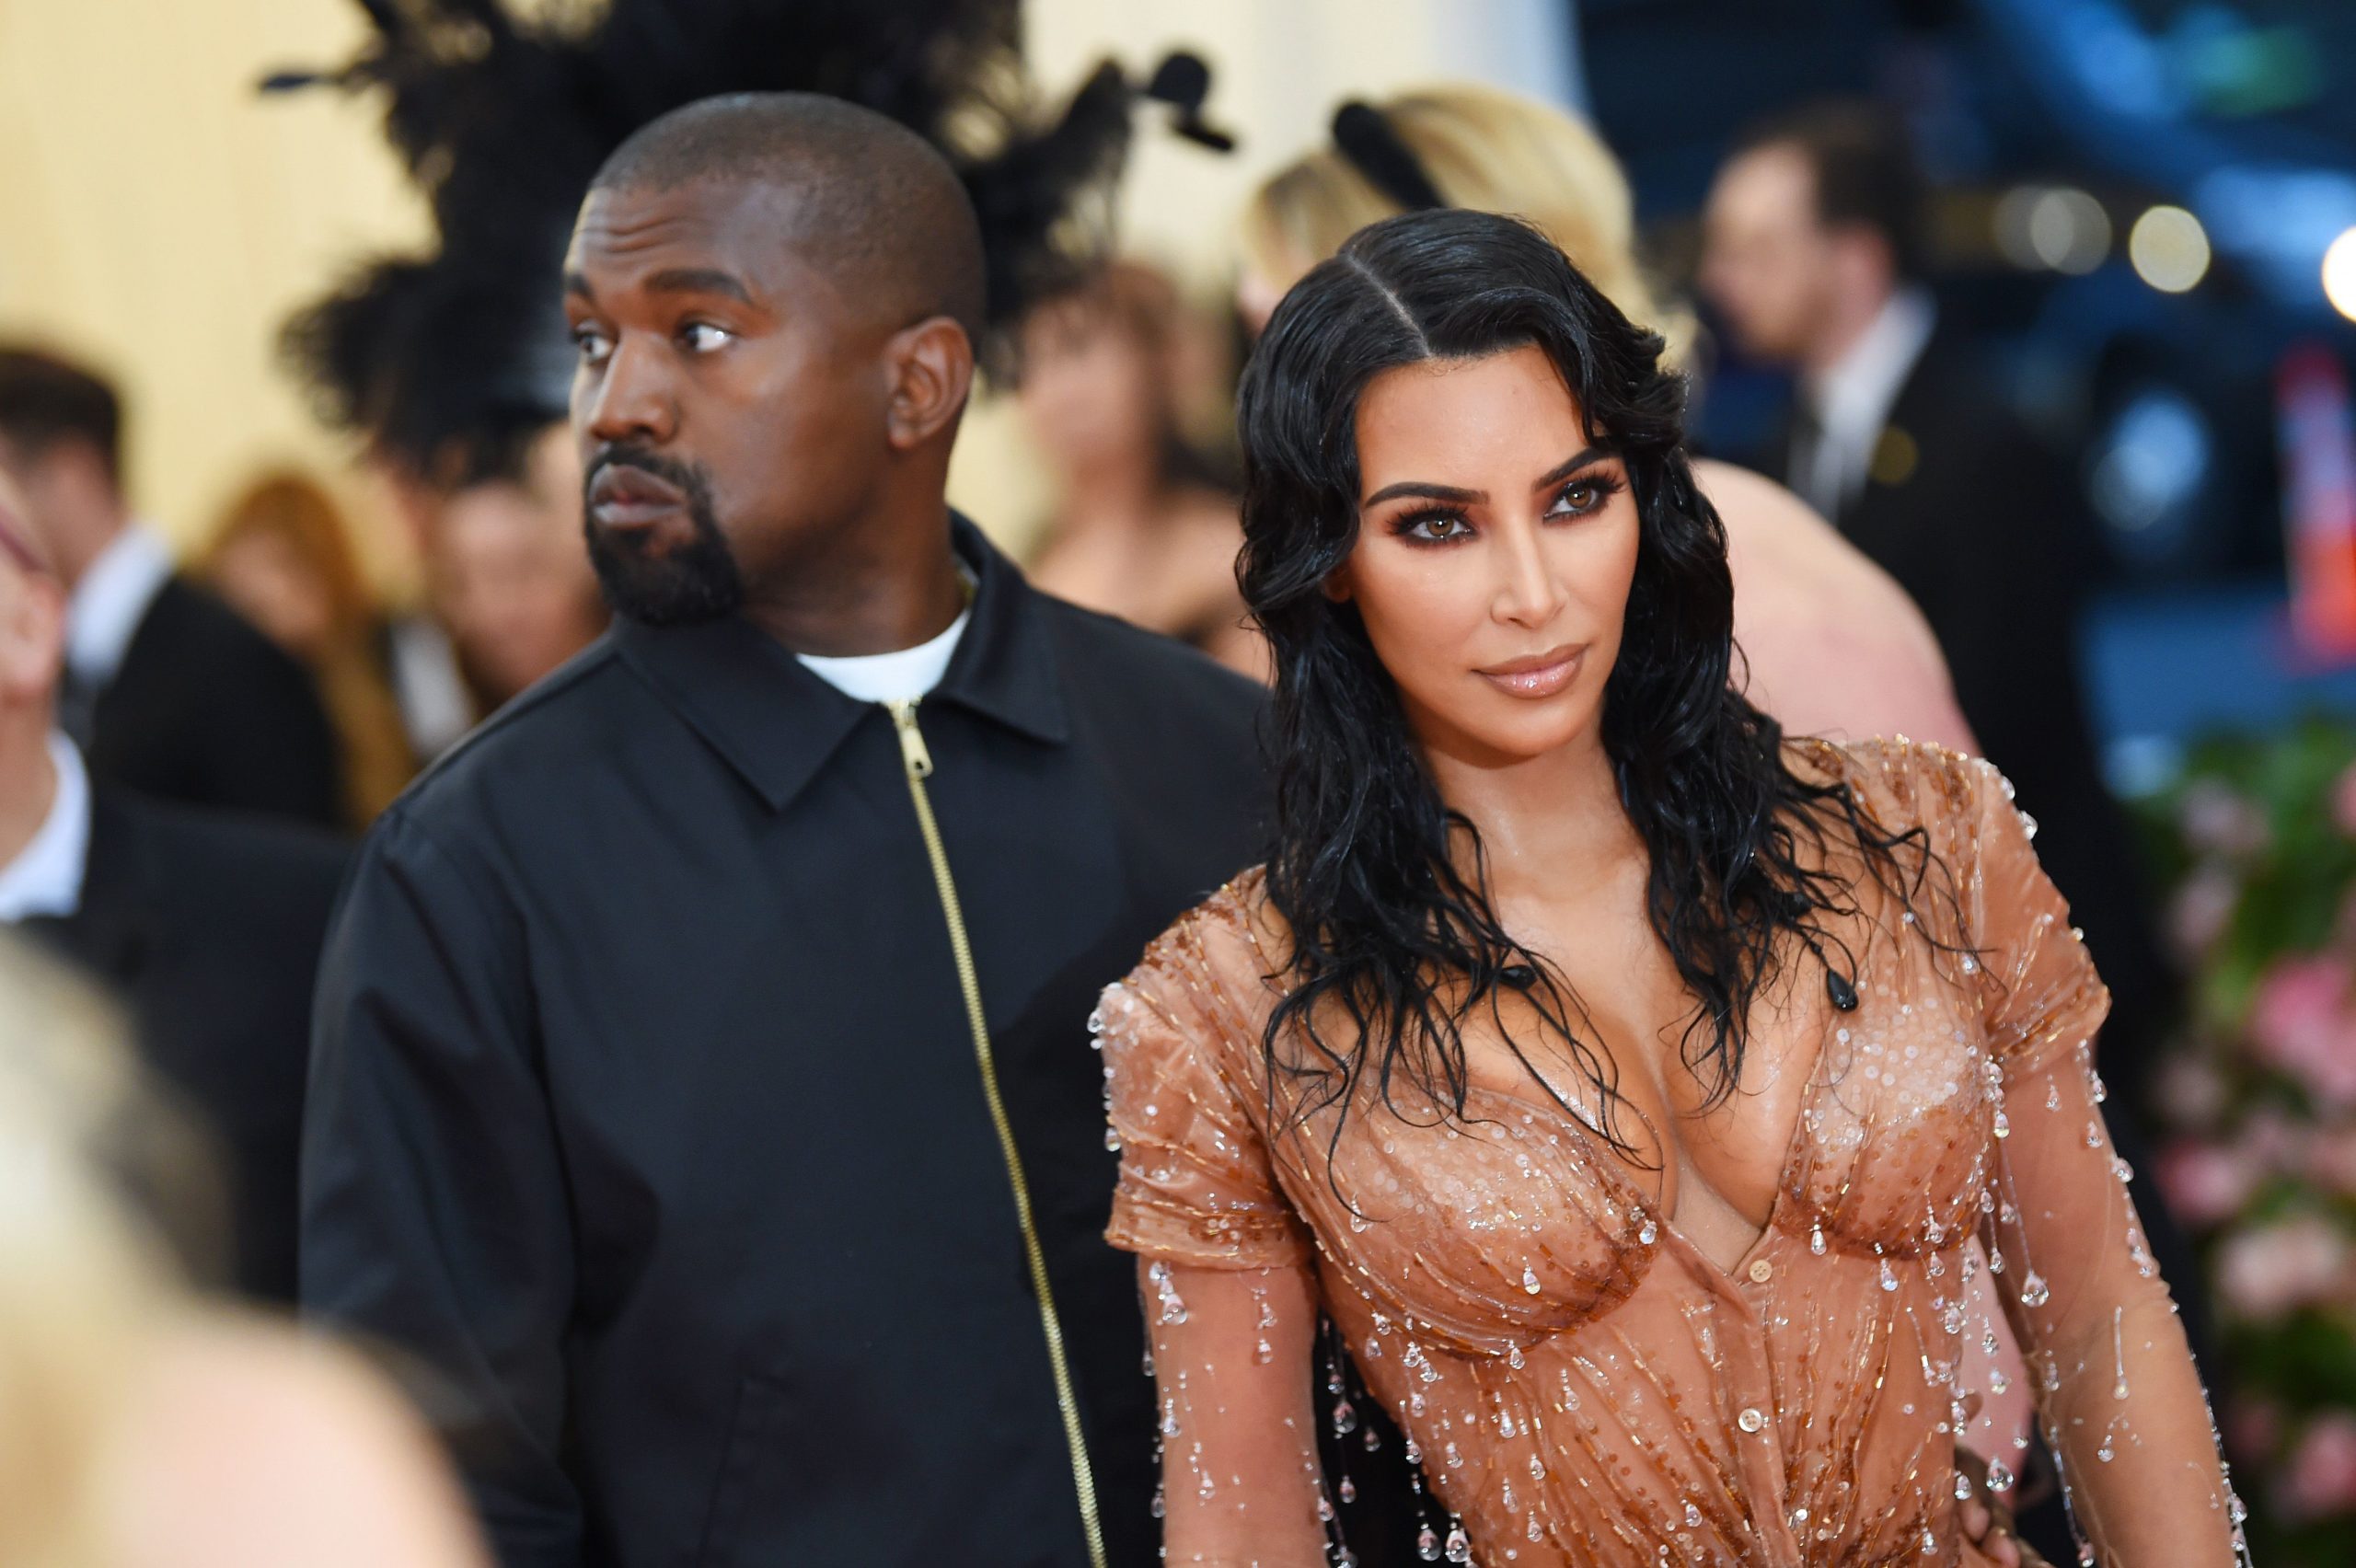 Kim Kardashian After Kanye West Cheating Confession Completely Humiliated! Reunion Impossible After Shocking Confession?